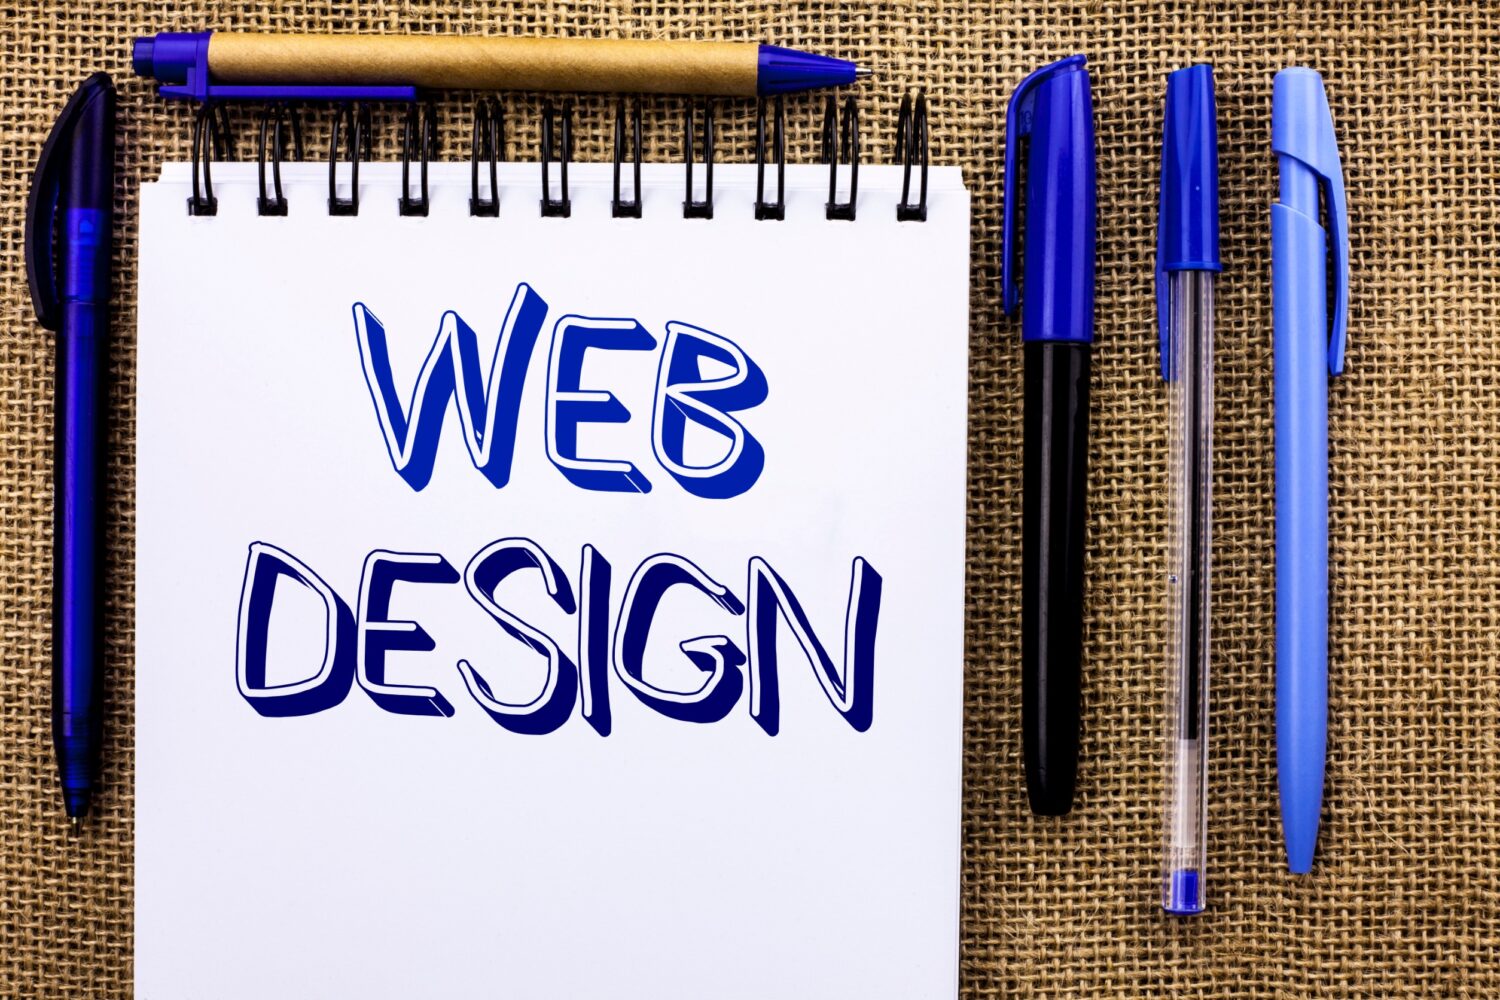 A notebook with the words “Web Design” written across the page is surrounded by pens.